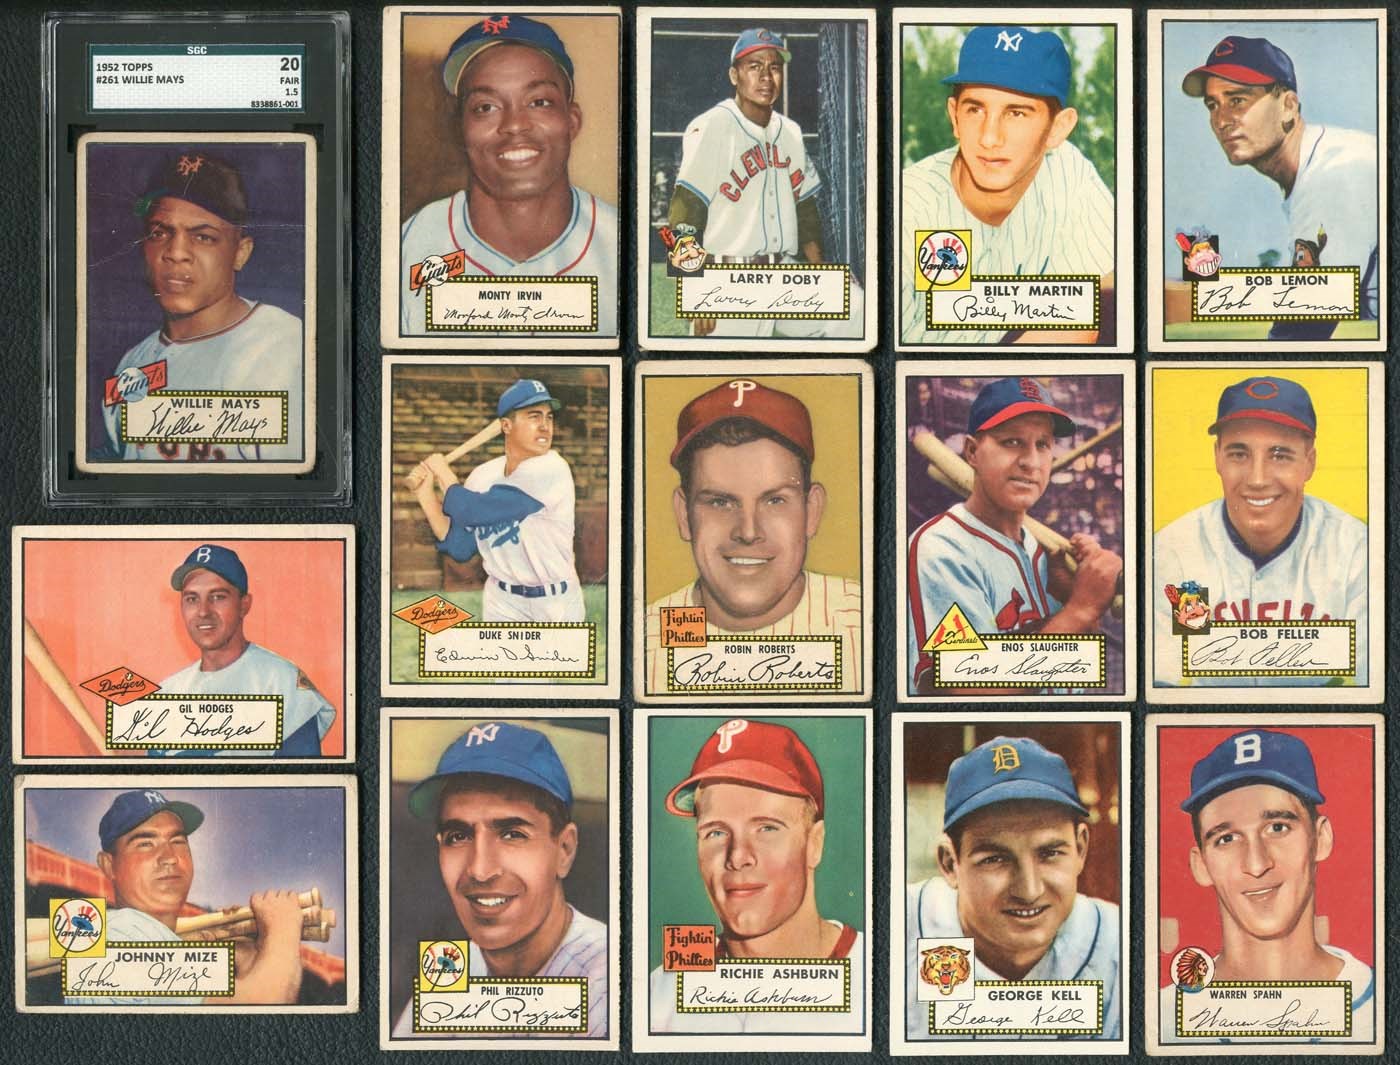 1952 Topps Complete Low Number Set (1-310) with SGC Graded Mays